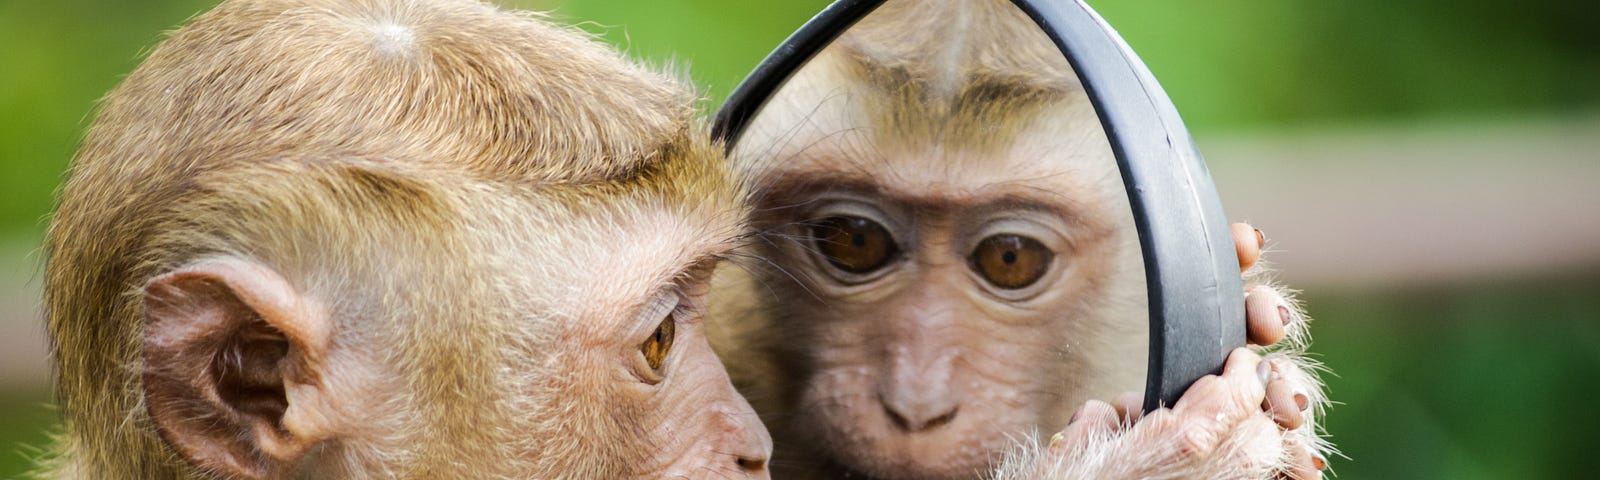 A small light brown monkey stares soulfully into a mirror it is holding up to its face.